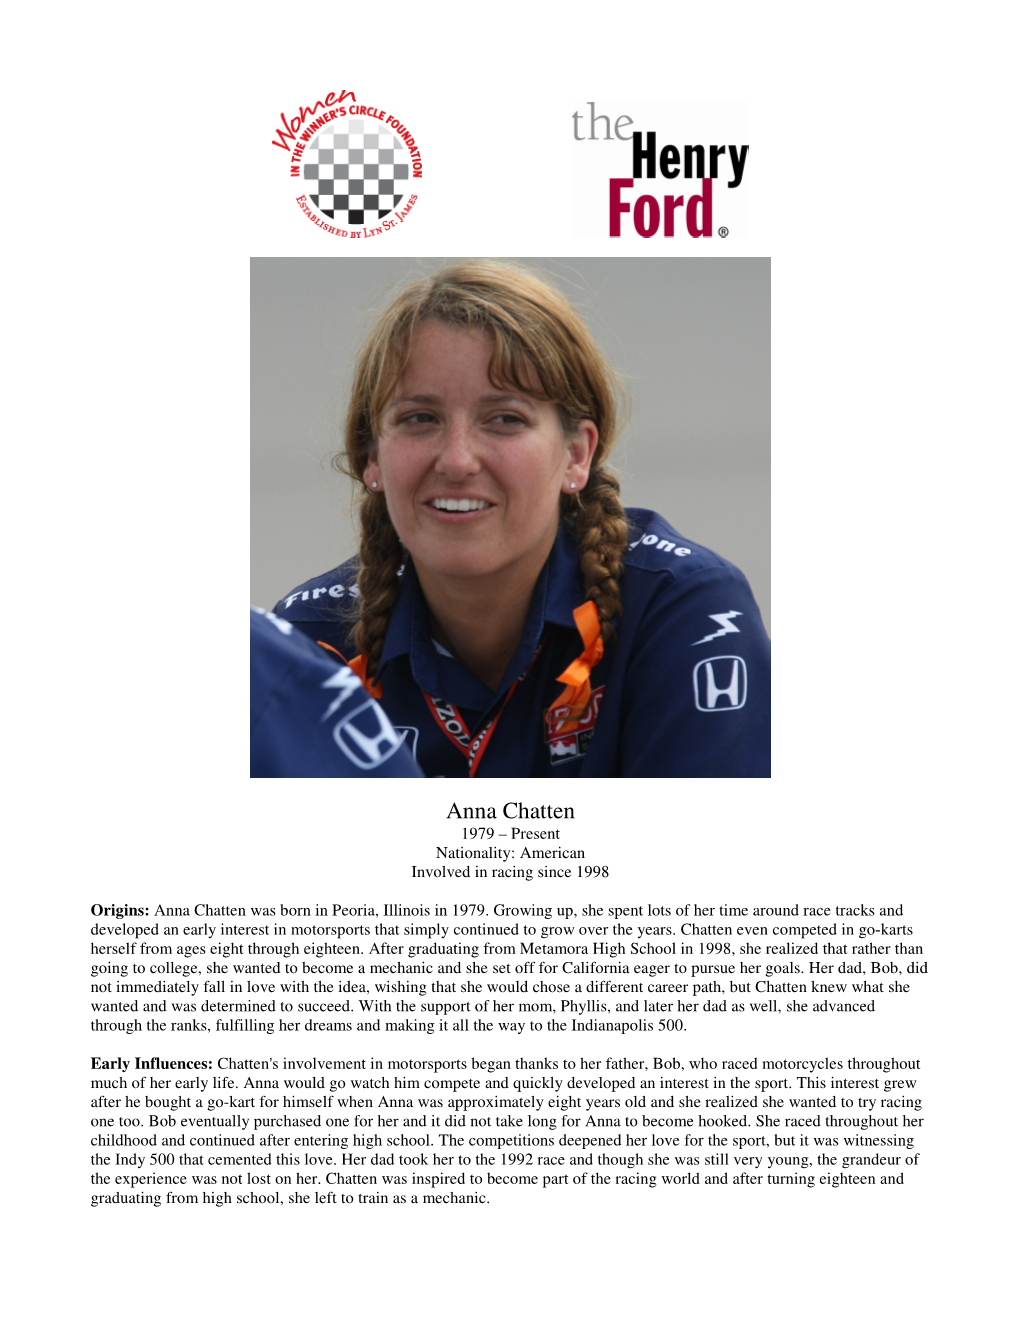 Anna Chatten 1979 – Present Nationality: American Involved in Racing Since 1998